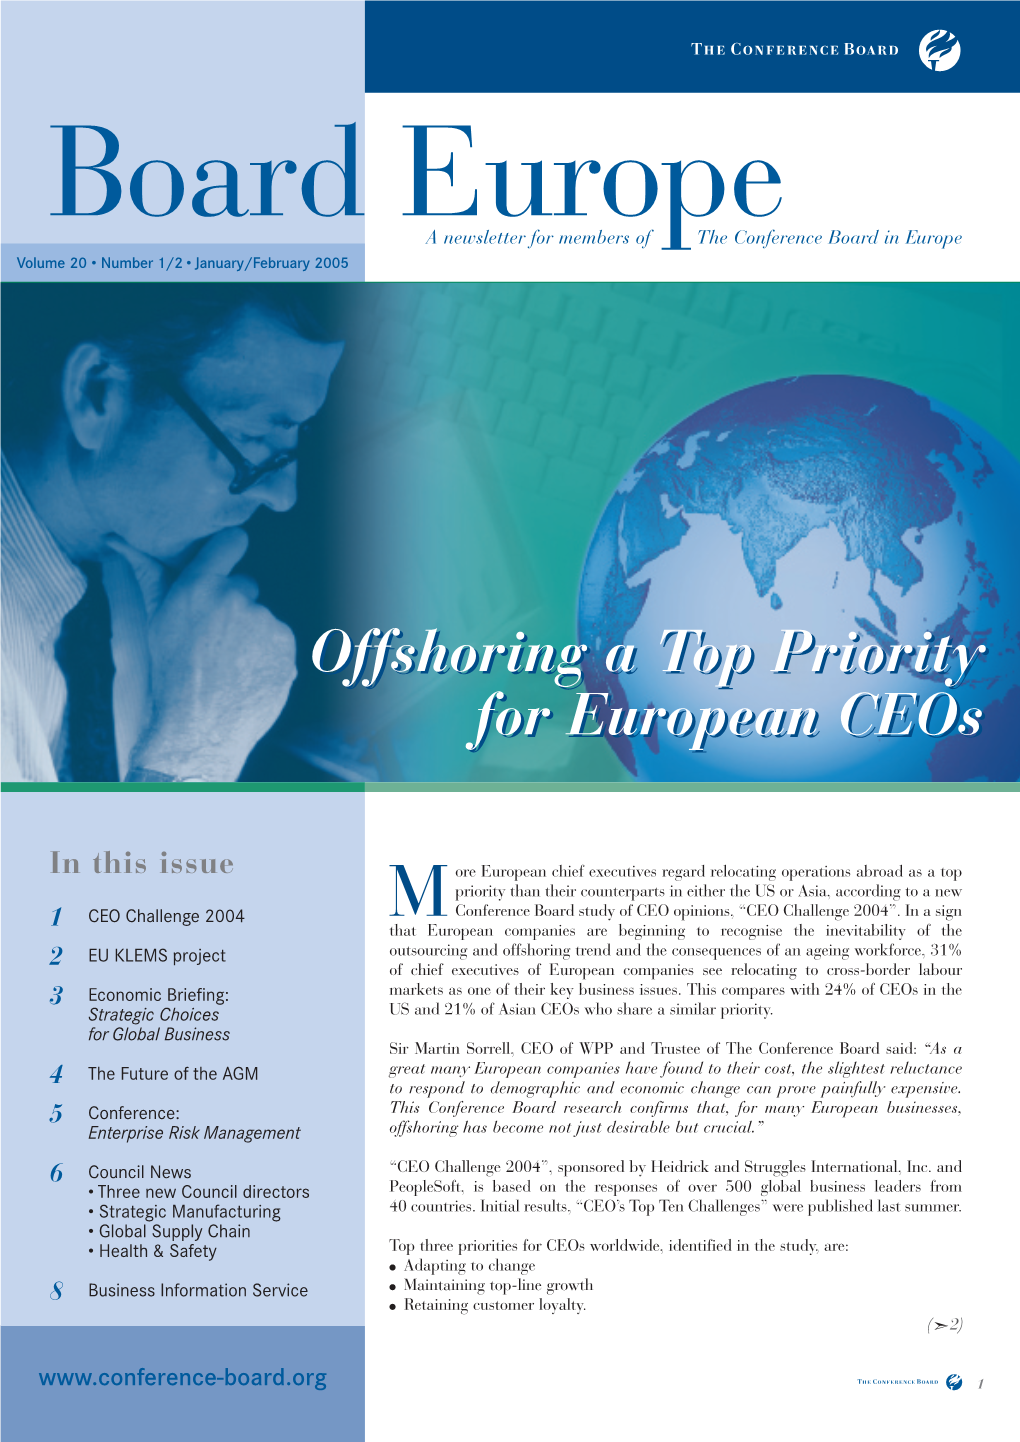 Offshoring a Top Priority for European Ceos